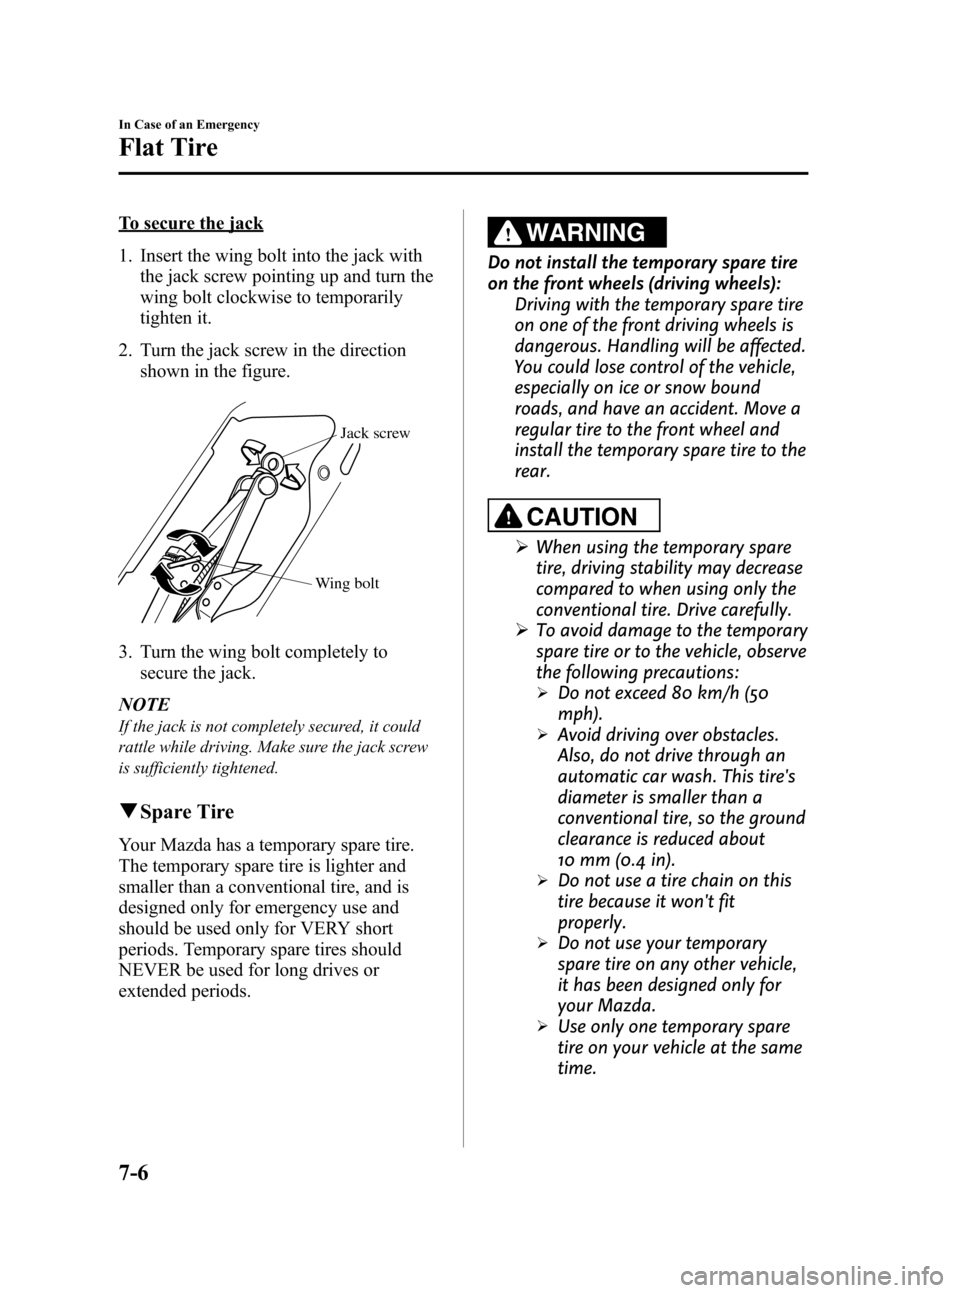 MAZDA MODEL 3 HATCHBACK 2010  Owners Manual (in English) Black plate (344,1)
To secure the jack
1. Insert the wing bolt into the jack with
the jack screw pointing up and turn the
wing bolt clockwise to temporarily
tighten it.
2. Turn the jack screw in the d